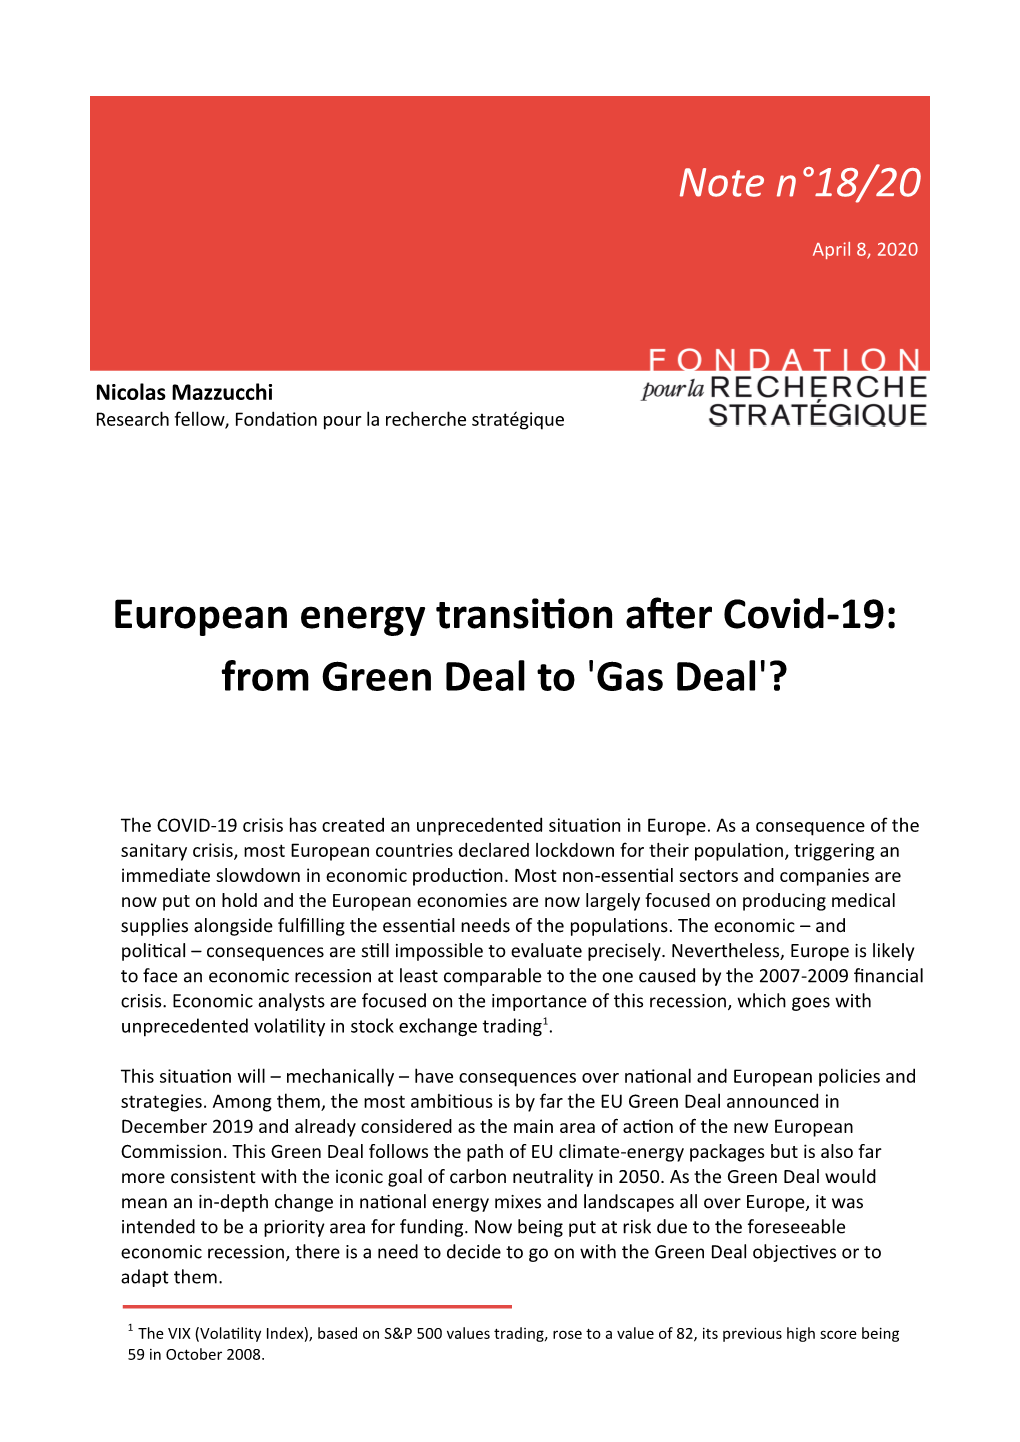 European Energy Transition After Covid-19: from Green Deal to 'Gas Deal'?